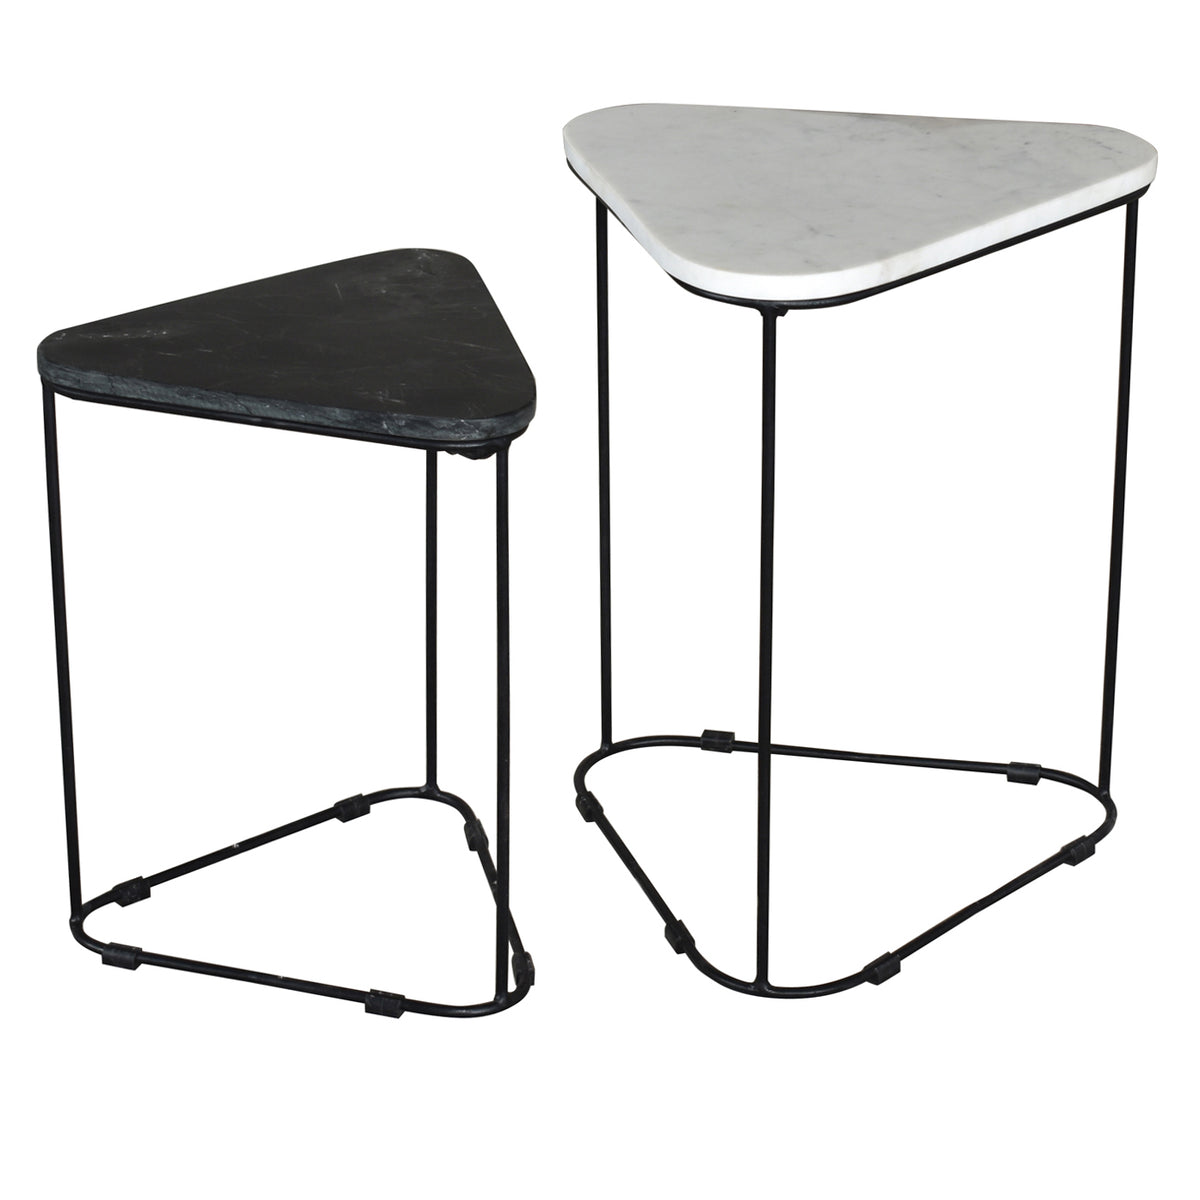 Bare Decor Selfy 2Pc Nesting Accent Tables in Black and White Triangle Marble